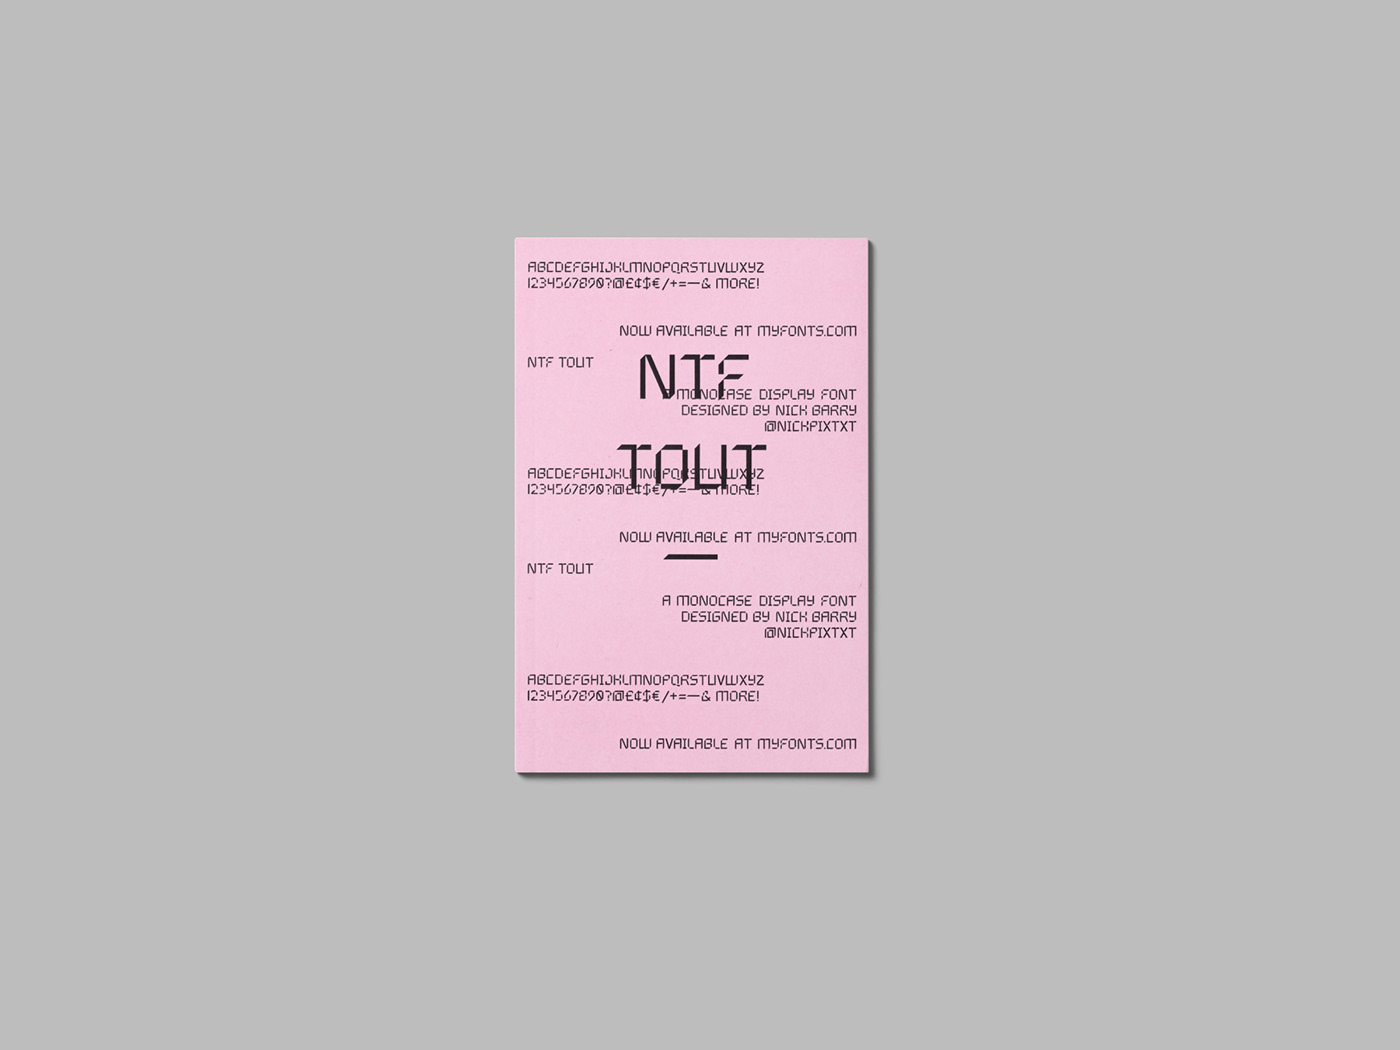 The front cover of this type specimen zine.